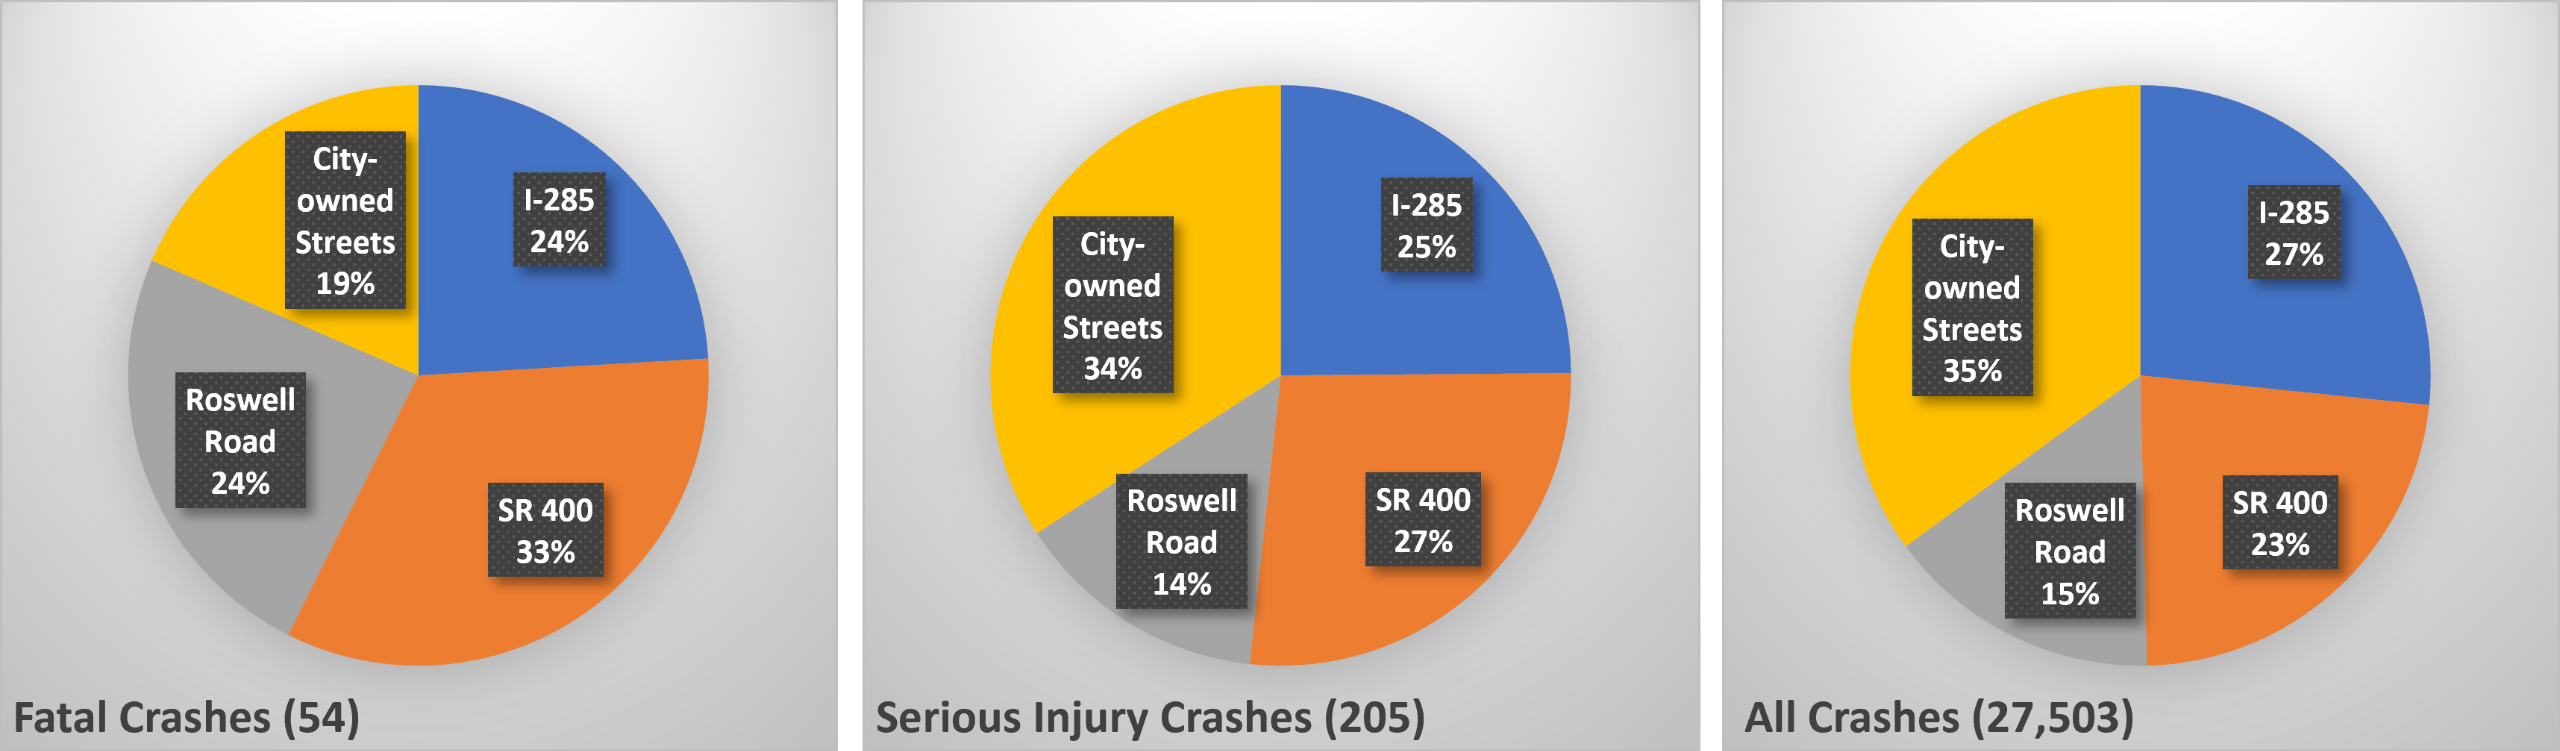 A three part pie chart, showing the percentage of fatal, serious, and all crashes separated by city-owned streets, I-285, Roswell Road, and State Route 400